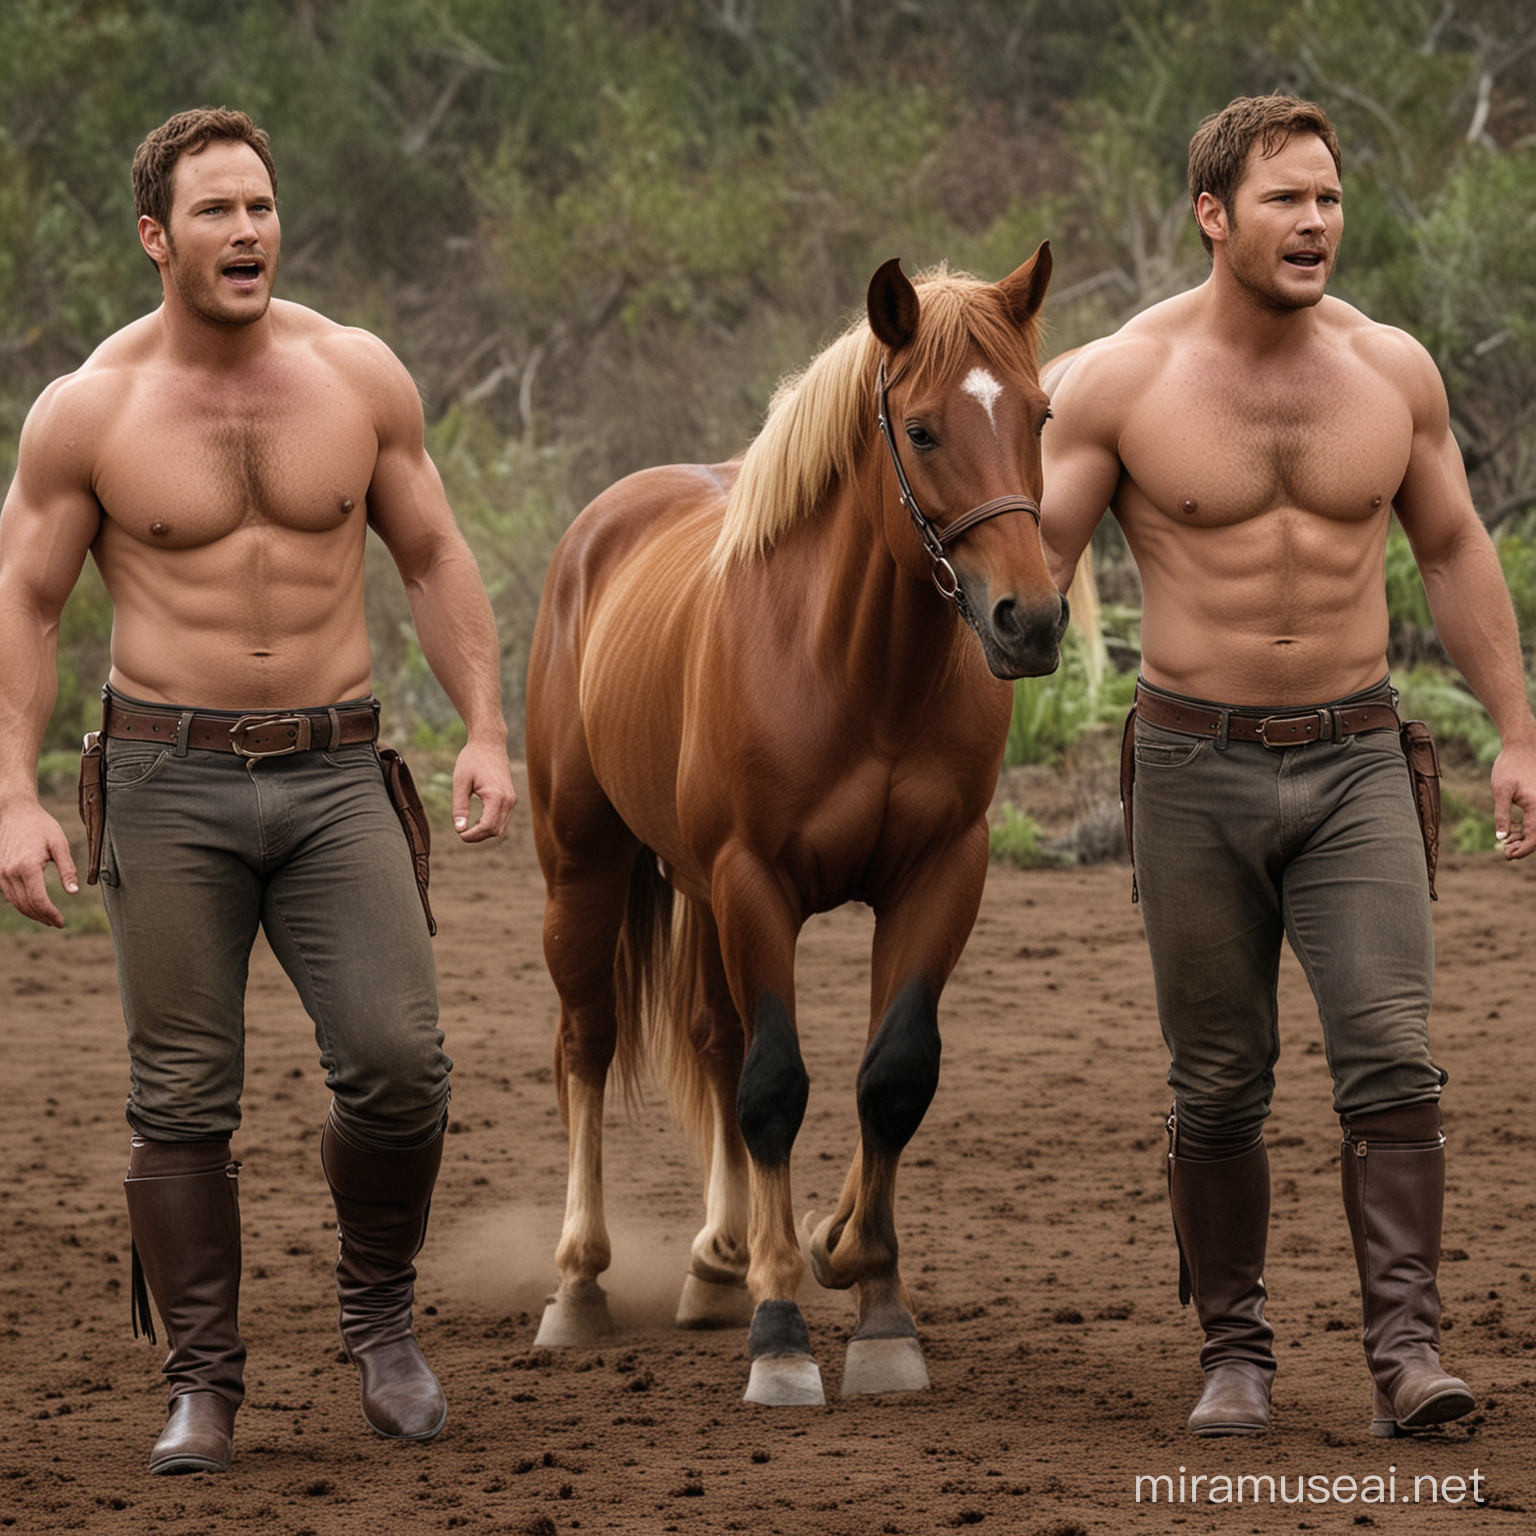 Chris Pratt on all fours transforming into a horse. He has horse ears. He has horse legs. He has horse hooves. He has a horse tail. He has a complete horse body and neighing like a horse. But his head is human.